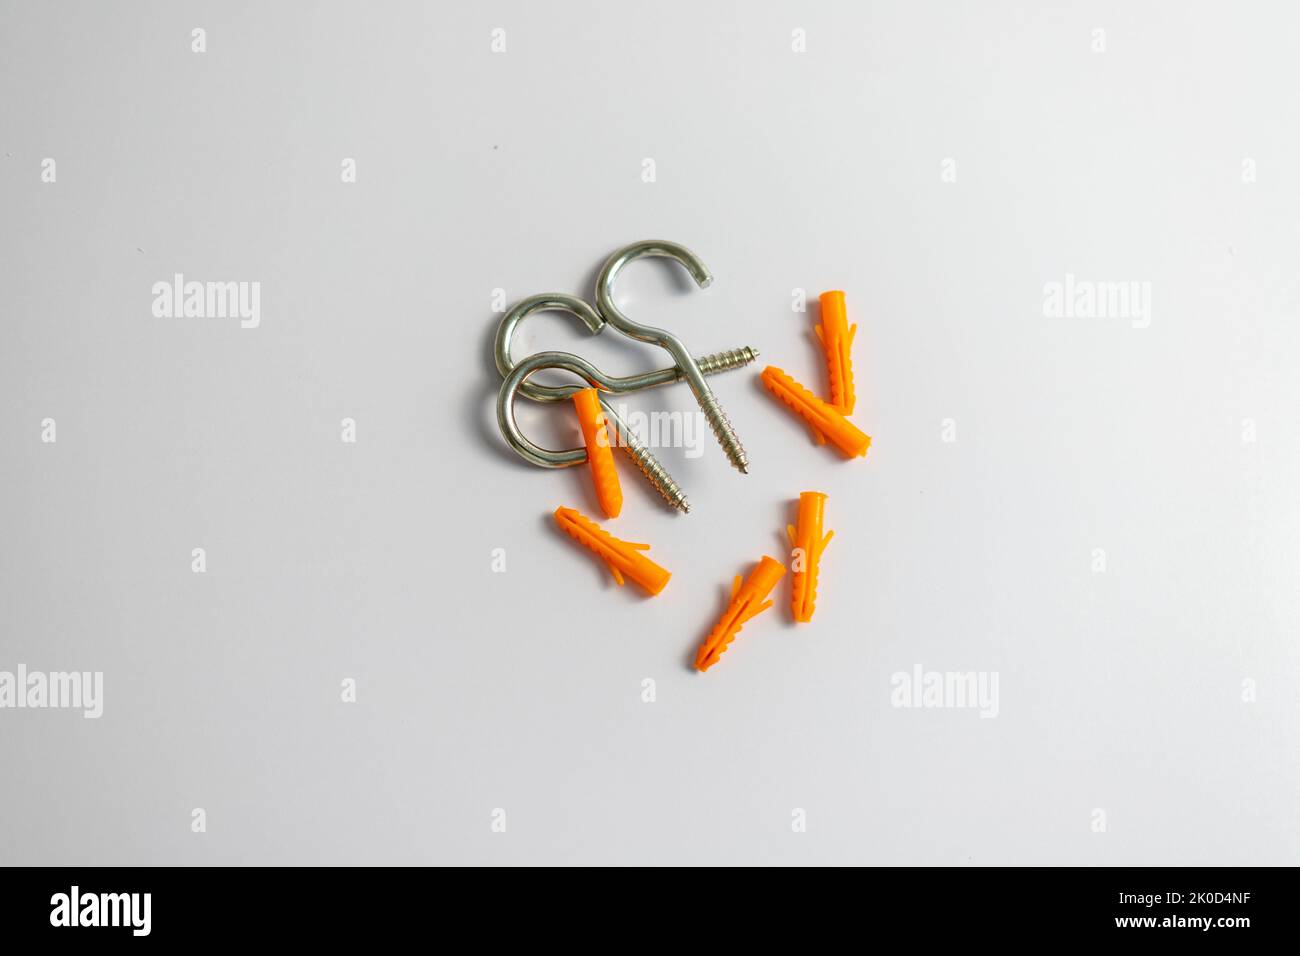 Heap of question mark hooks with plastic plugs on white background Stock Photo